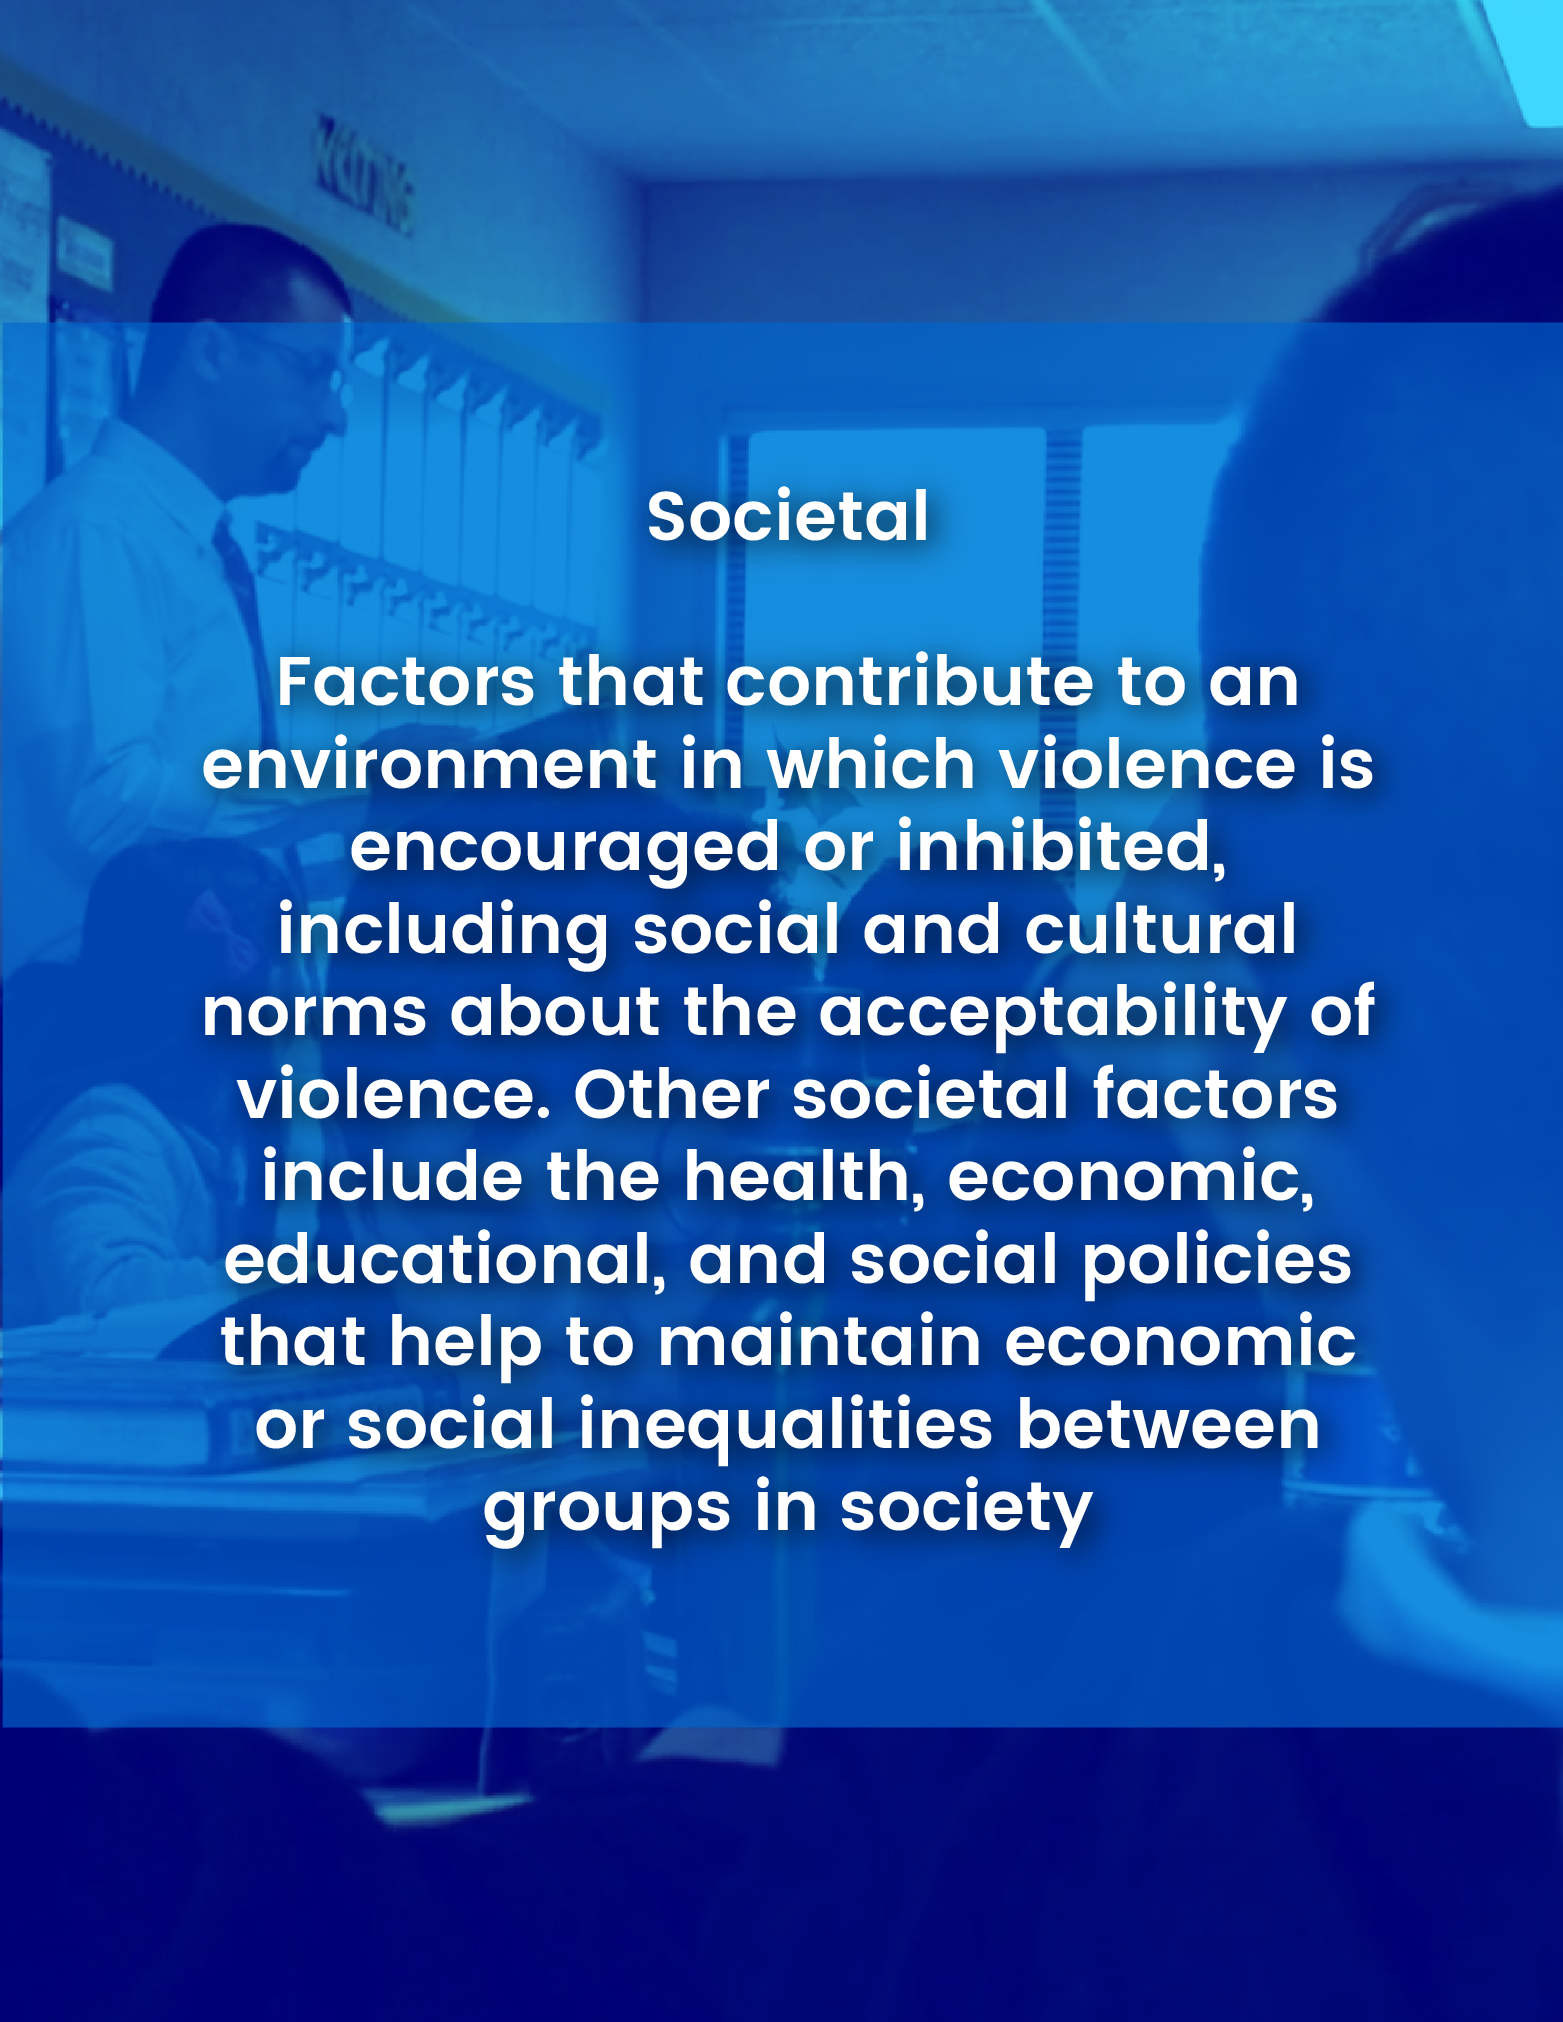 Societal - Factors at the societal level are those social and cultural norms that support or inhibit violence as an acceptable way to resolve conflicts. Large societal factors include health, economic, and social policies that help maintain economic or social inequalities between groups in society.